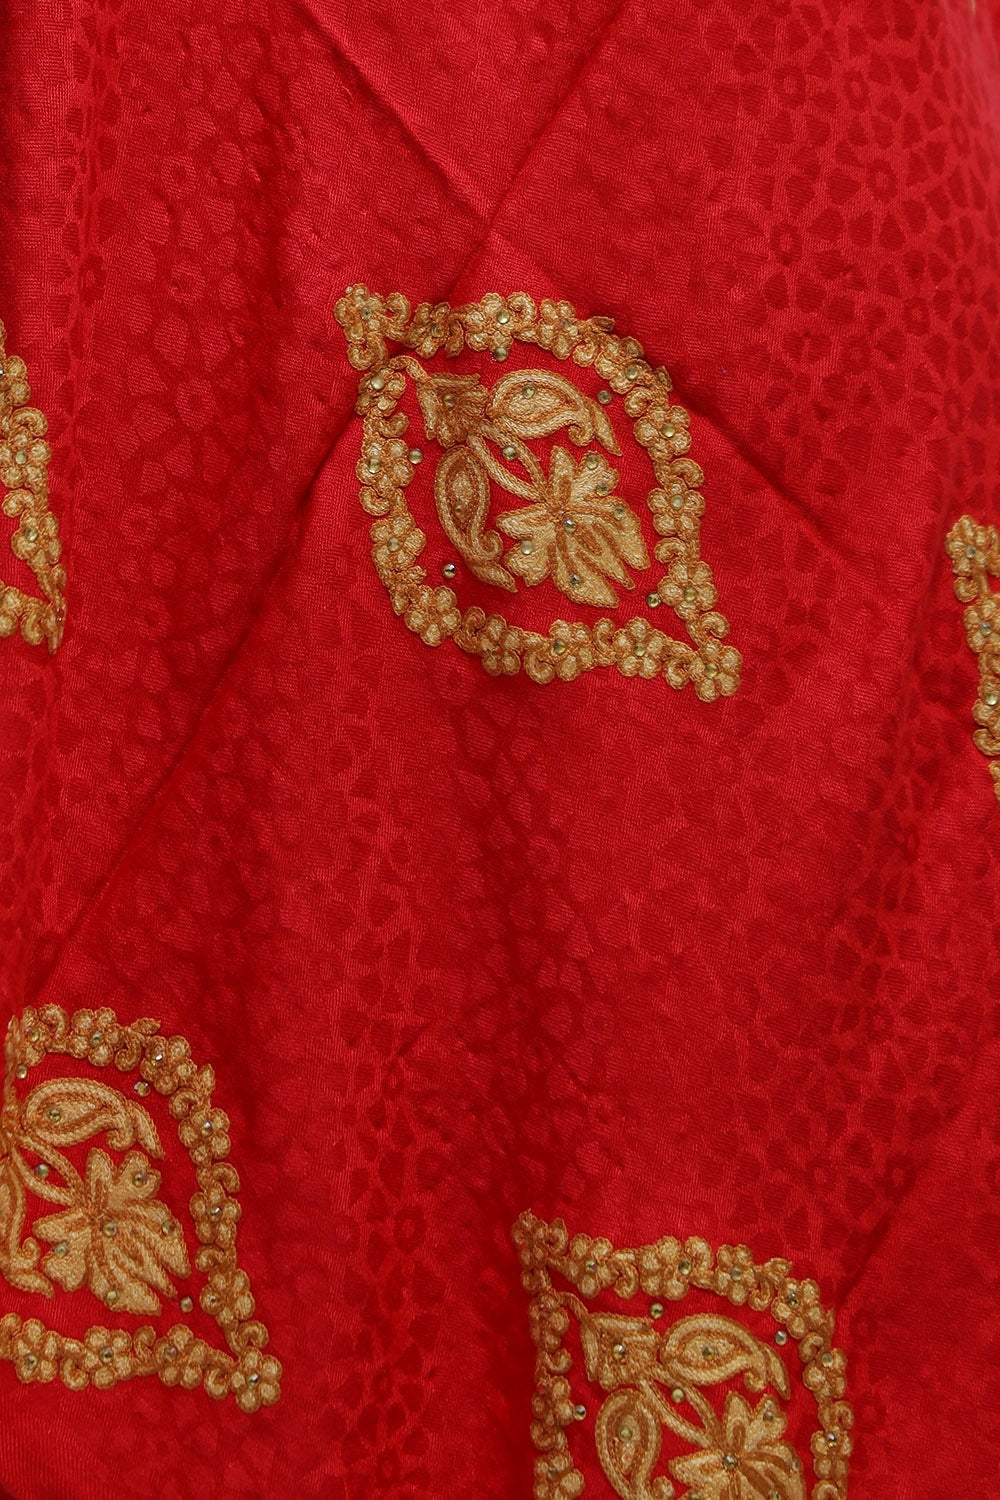 Hot Red Colour Stole Enriched With Aari Embroidery